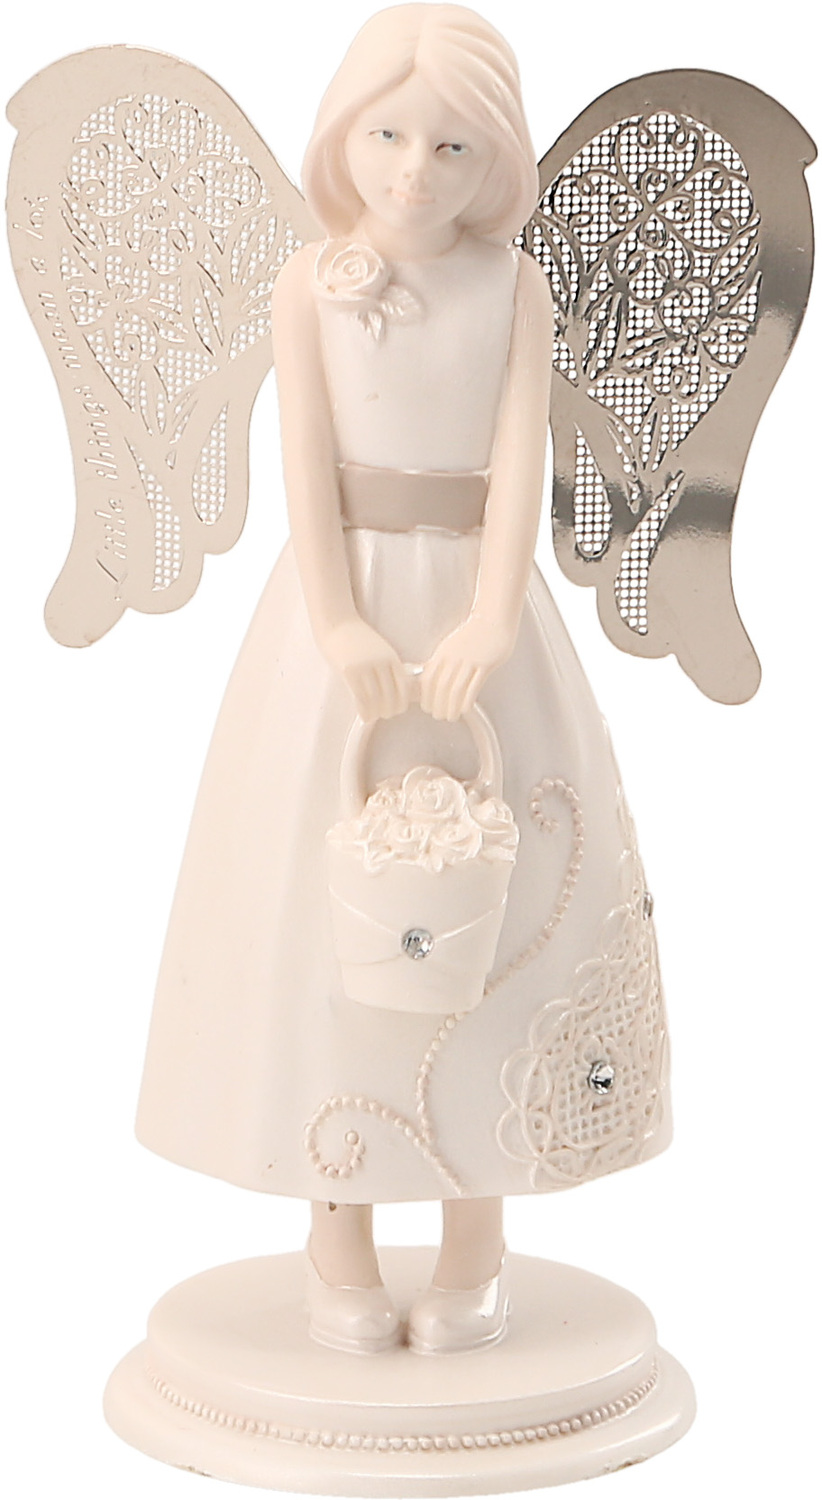 Flower Girl by Little Things Mean A Lot - Flower Girl - 4.25" Angel with Basket Flowers